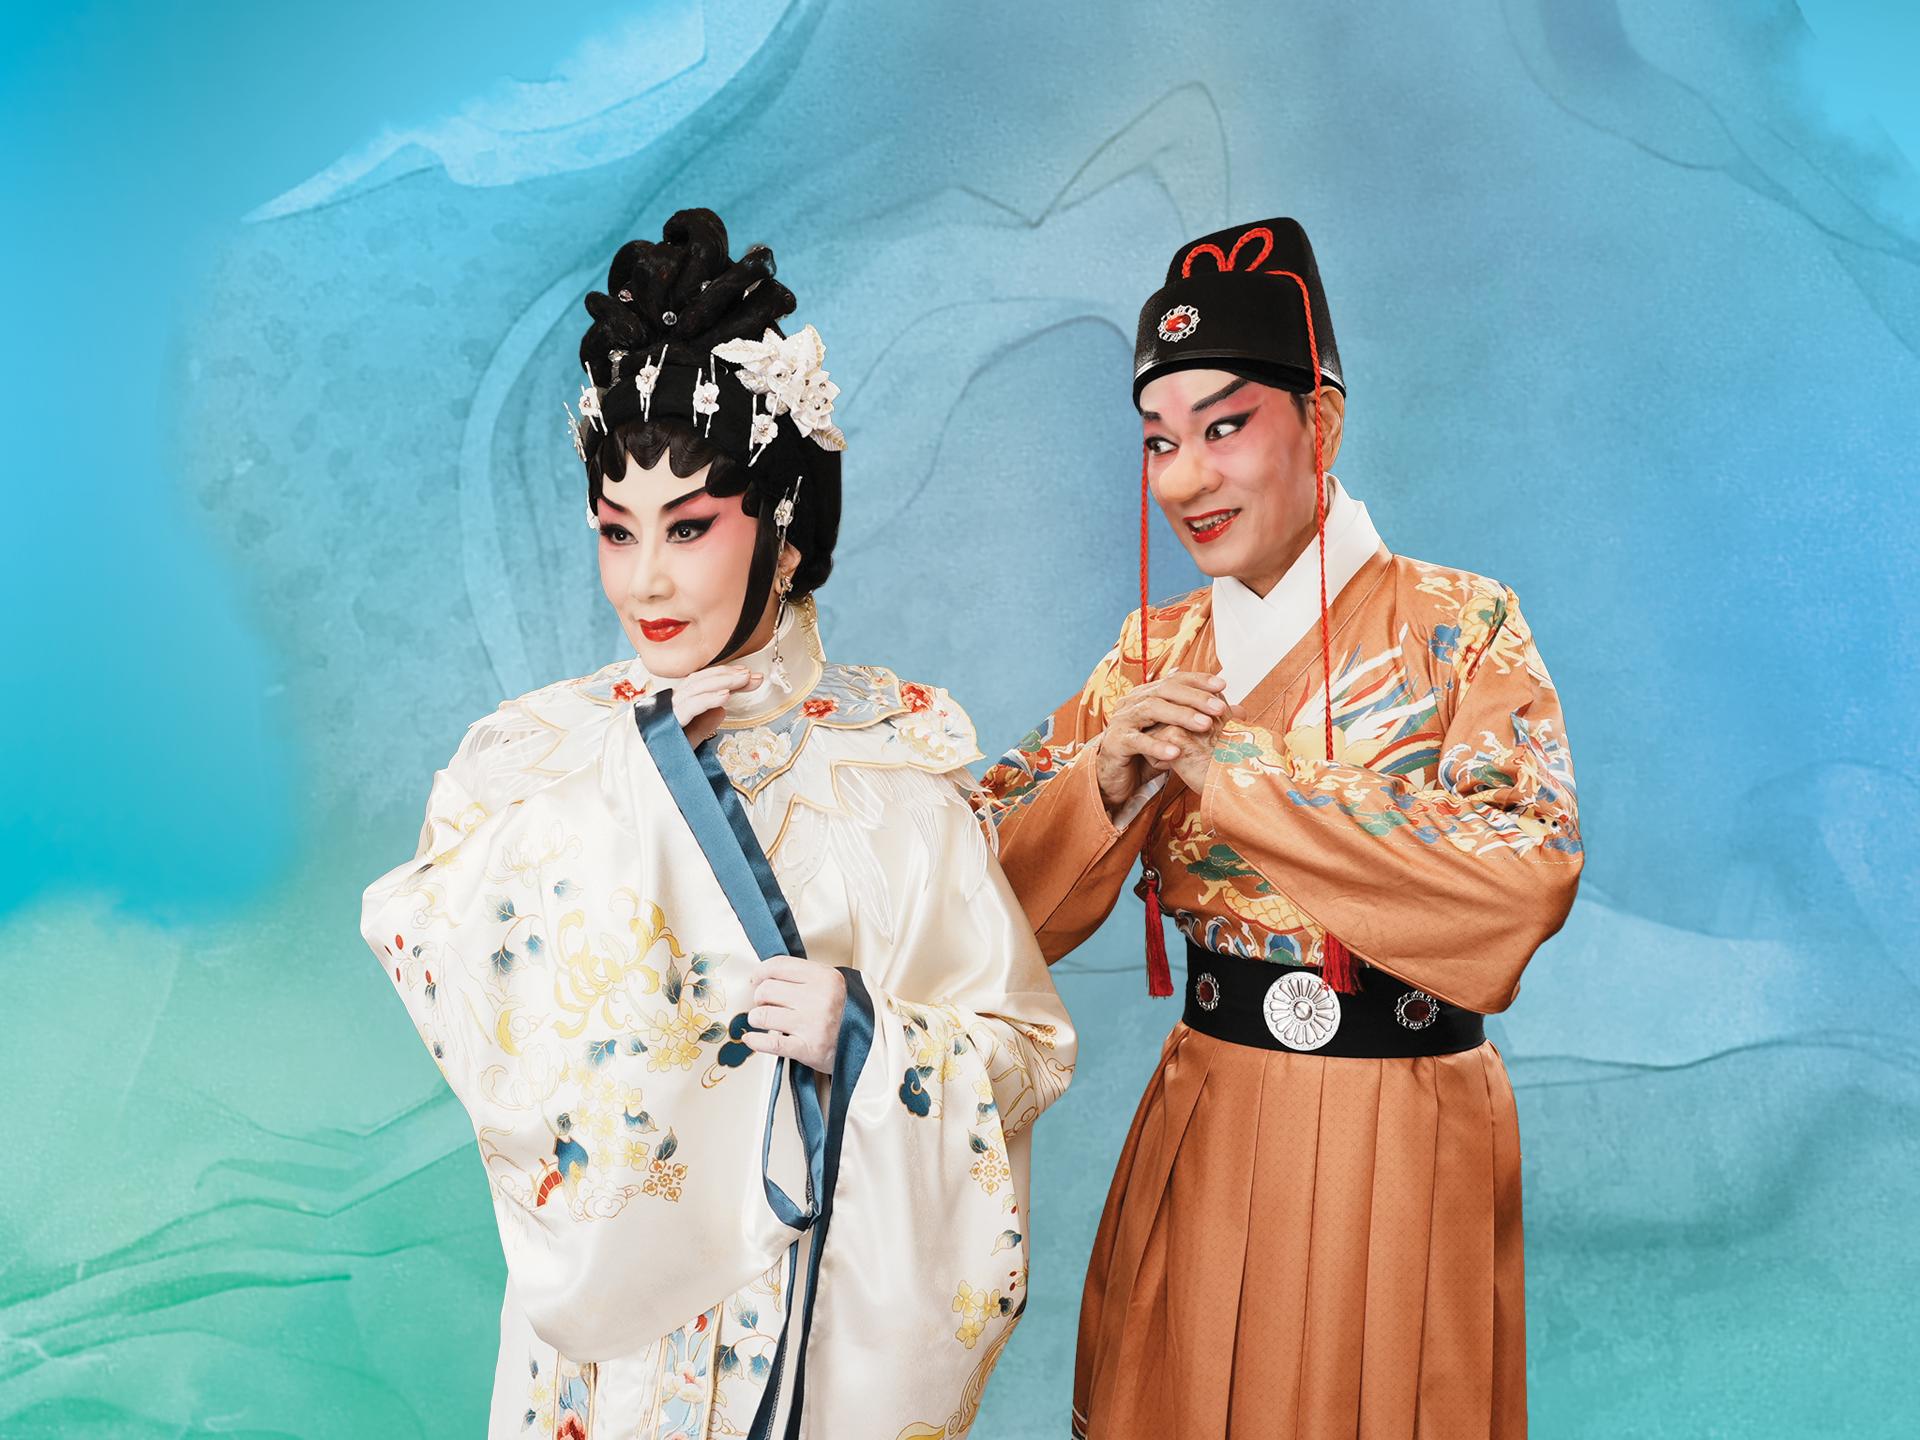 The inaugural Chinese Culture Festival will be held from June to September. Photo shows the opening programme of the Chinese Opera Festival, "Cyrano de Bergerac" - A Cantonese Opera Interpretation.